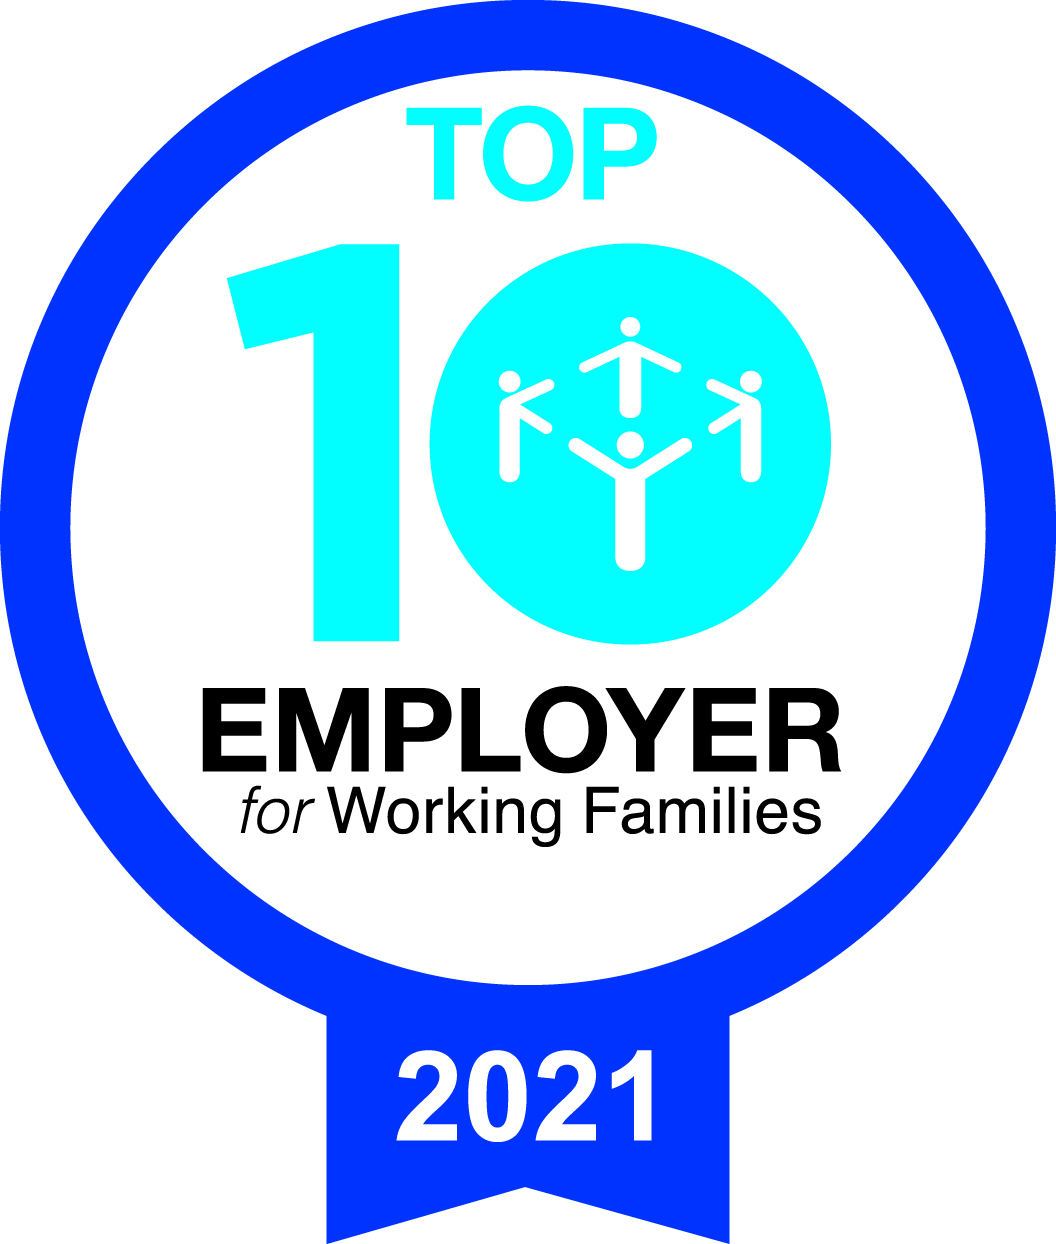 Top 10 employer for working families 2021